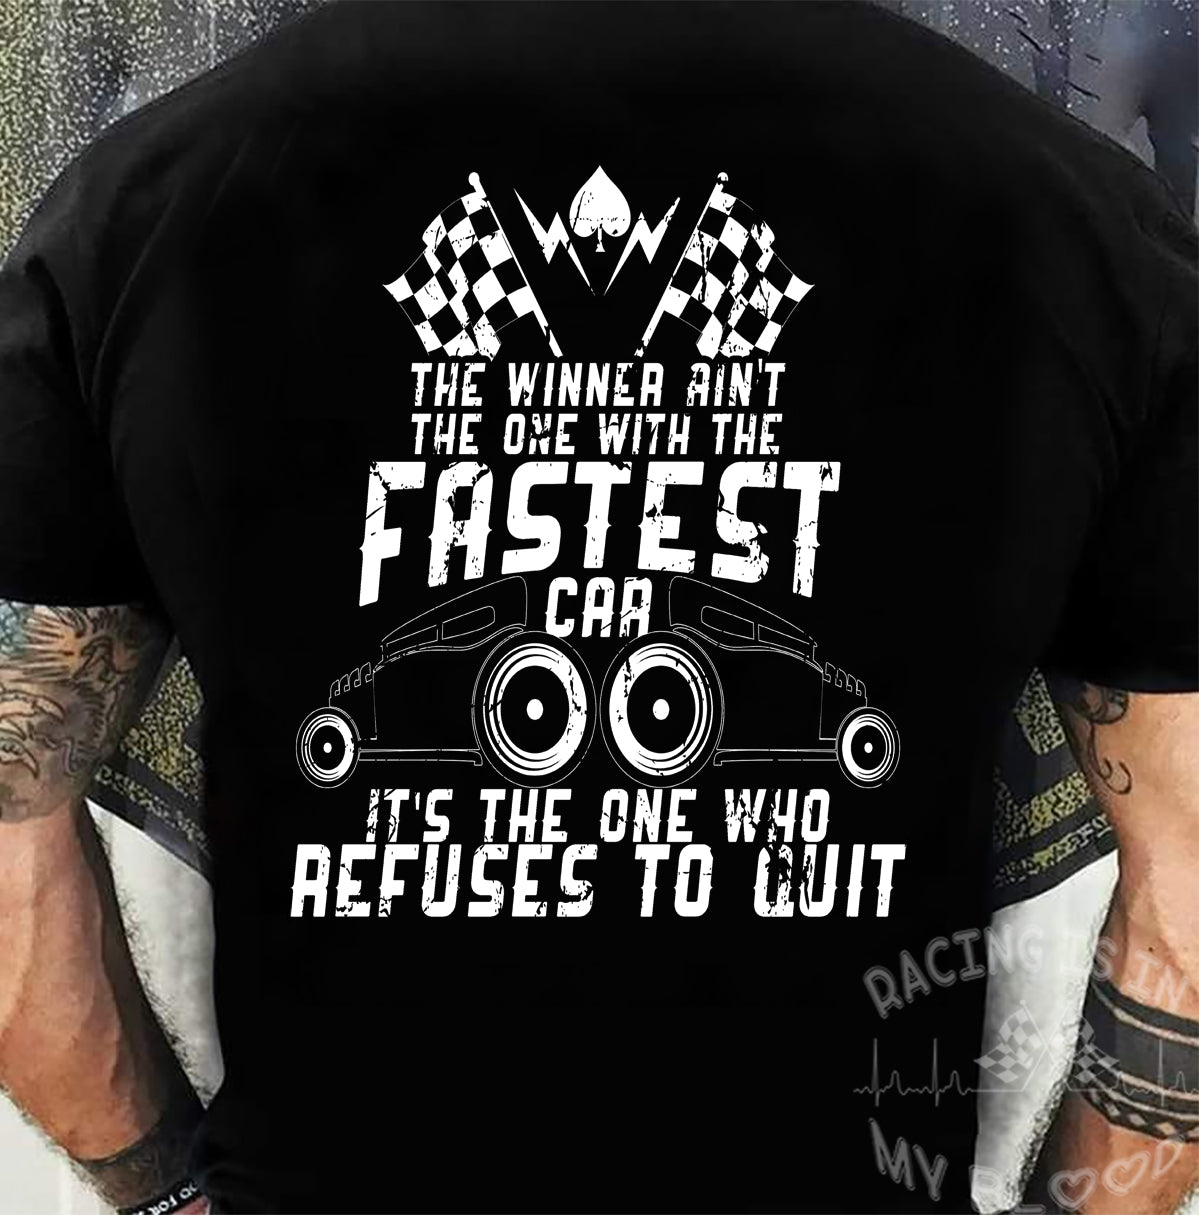 The Winner Ain't The One With The Fastest Car It's The One Who Refused To Quit T-Shirts!